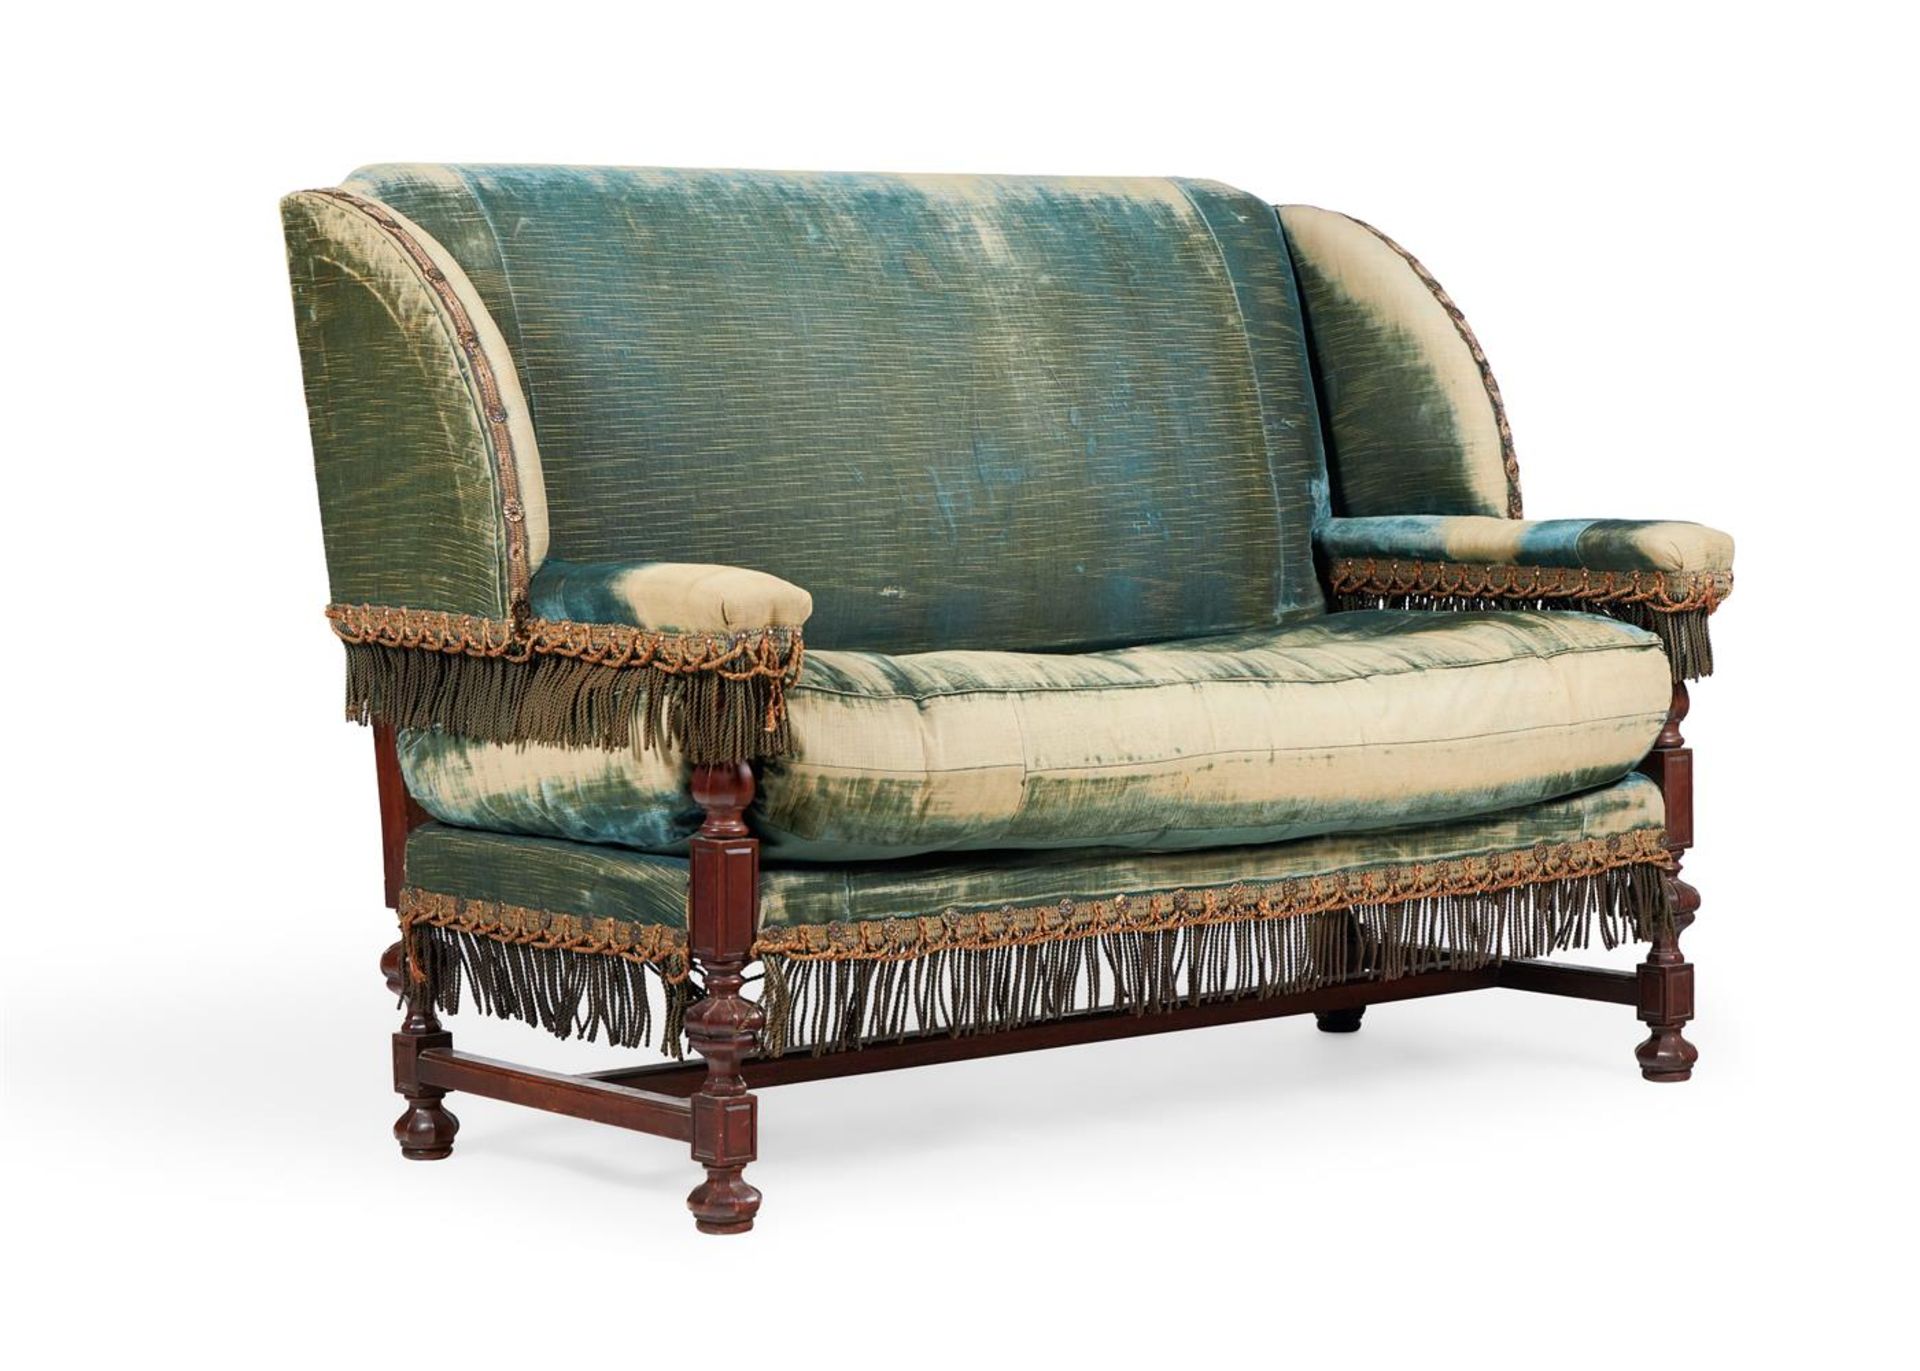 A WALNUT SOFA UPHOLSTERED IN TEAL VELVET IN WILLIAM AND MARY STYLE, EARLY 20TH CENTURY